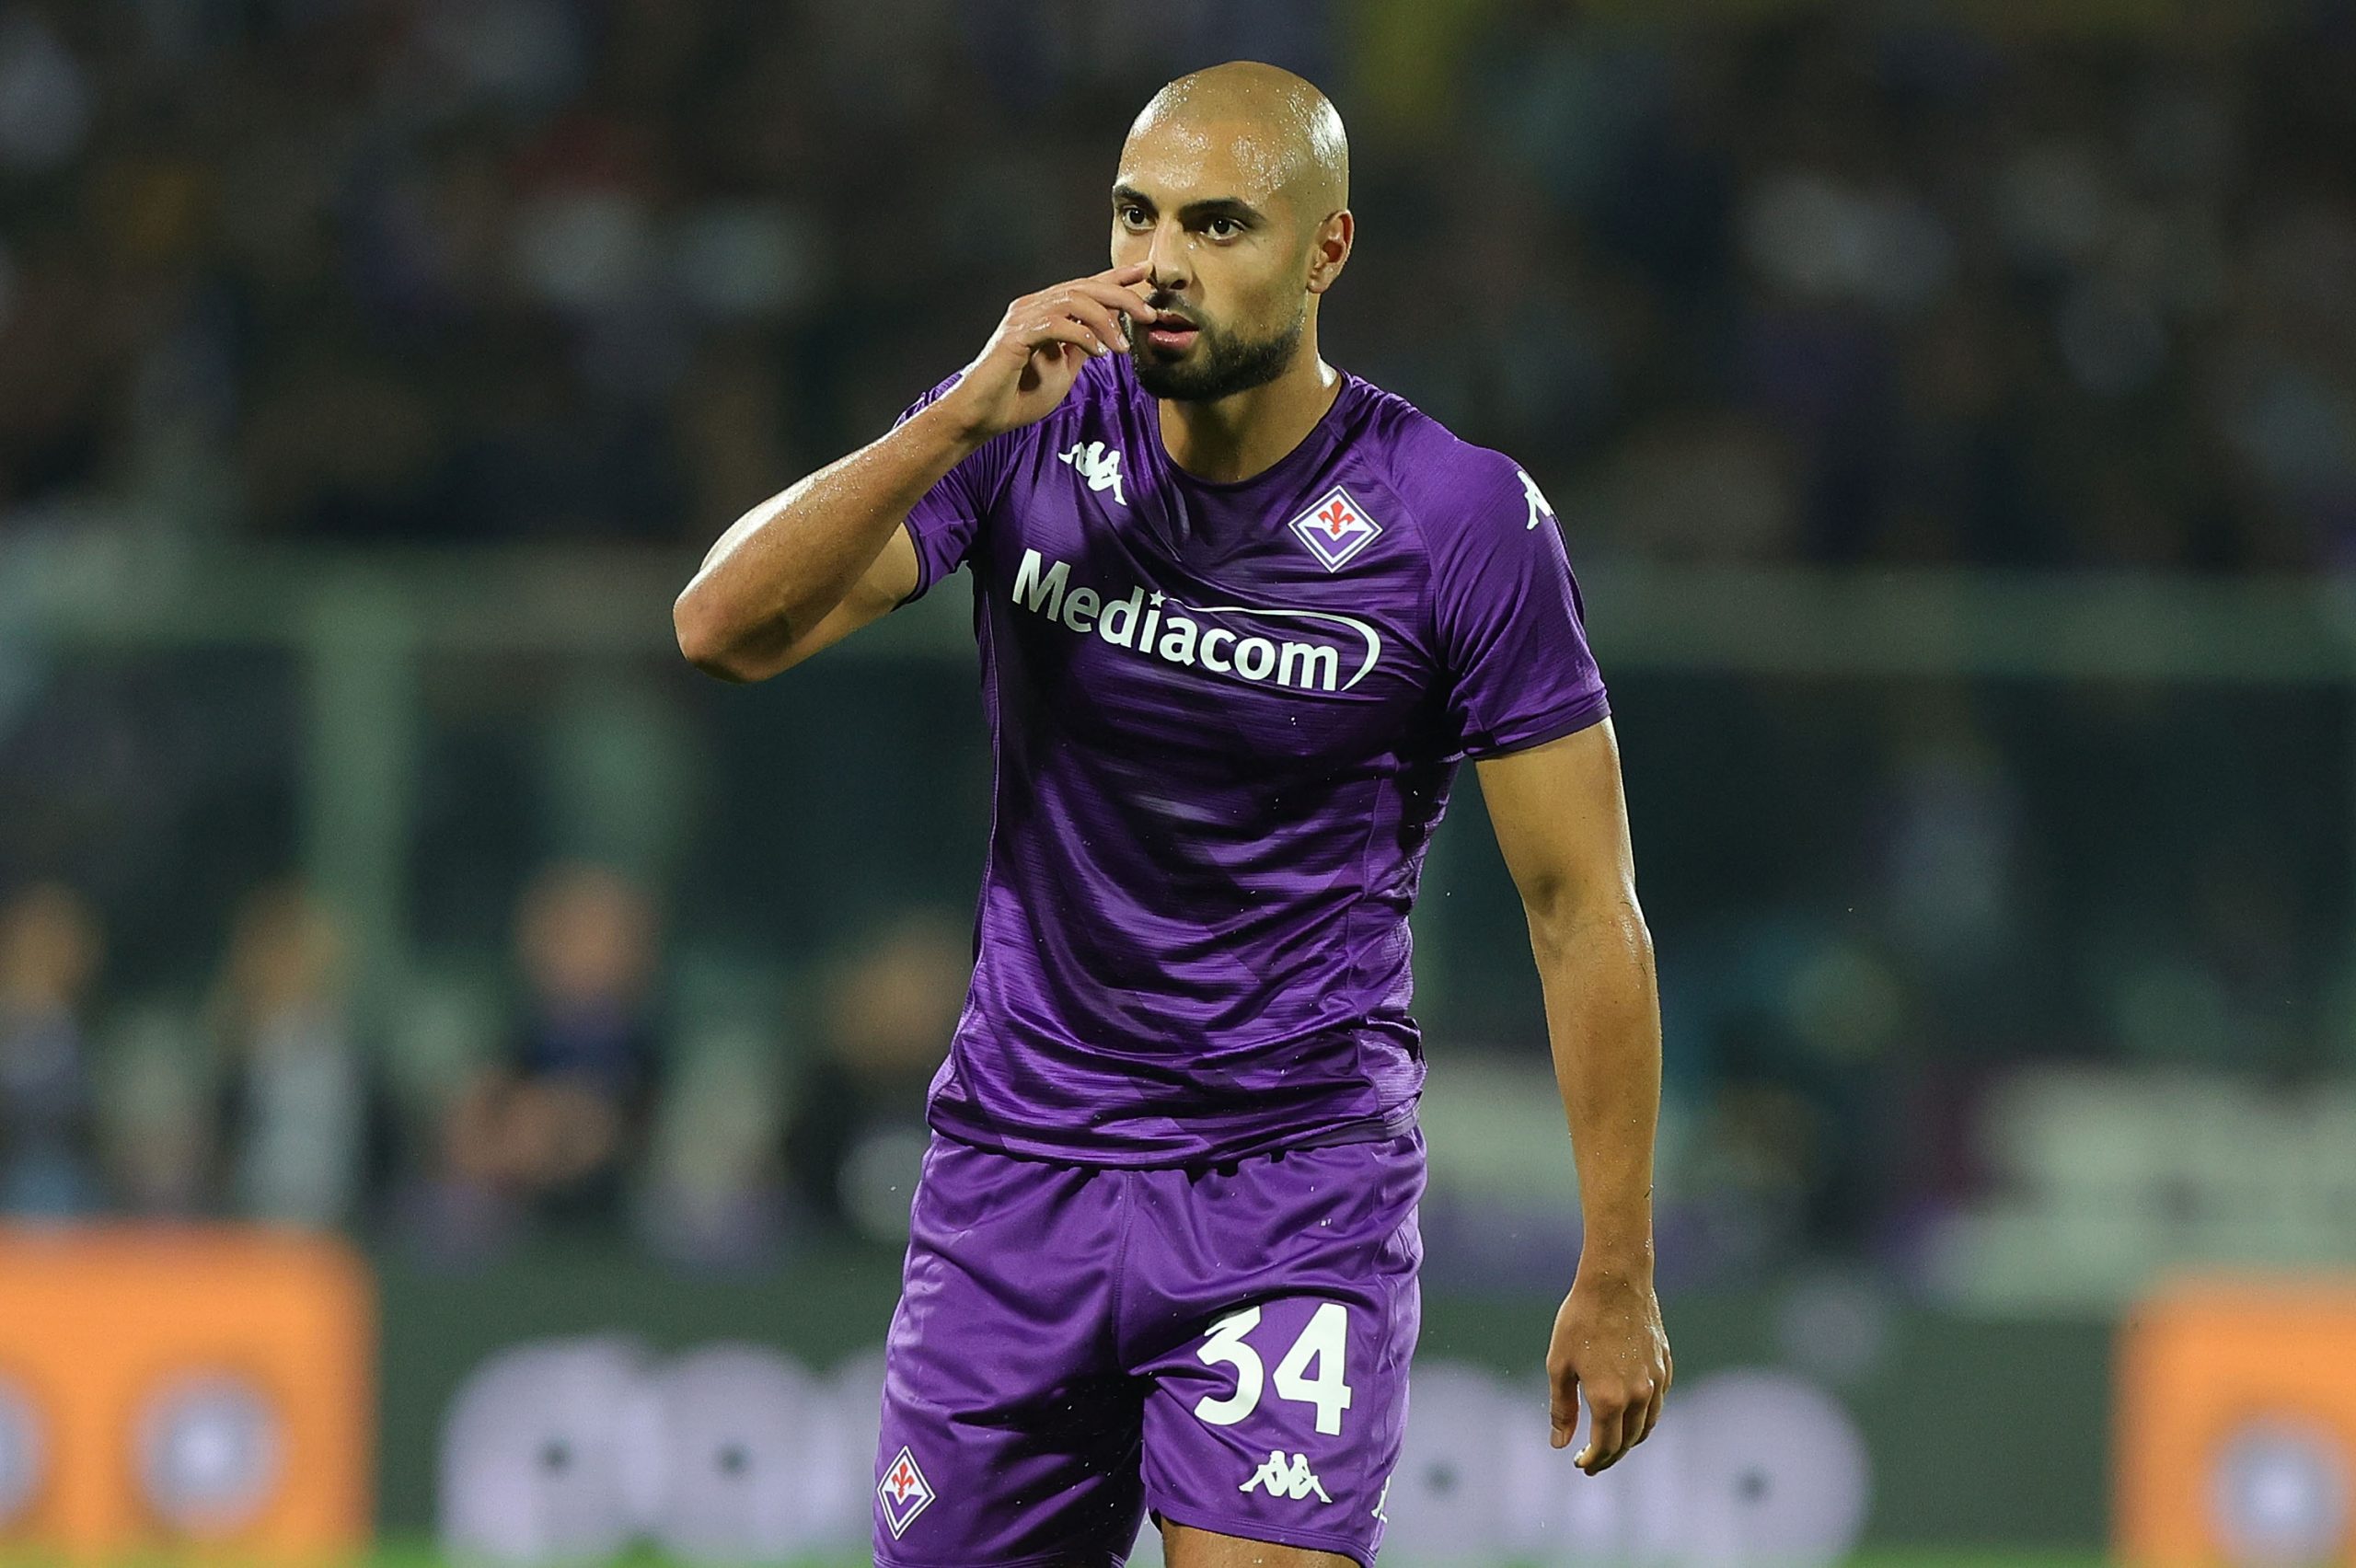 Sofyan Amrabat of ACF Fiorentina reacts during the Serie A match between ACF Fiorentina and SS Lazio at Stadio Artemio Franchi on October 10, 2022 in Florence, Italy.